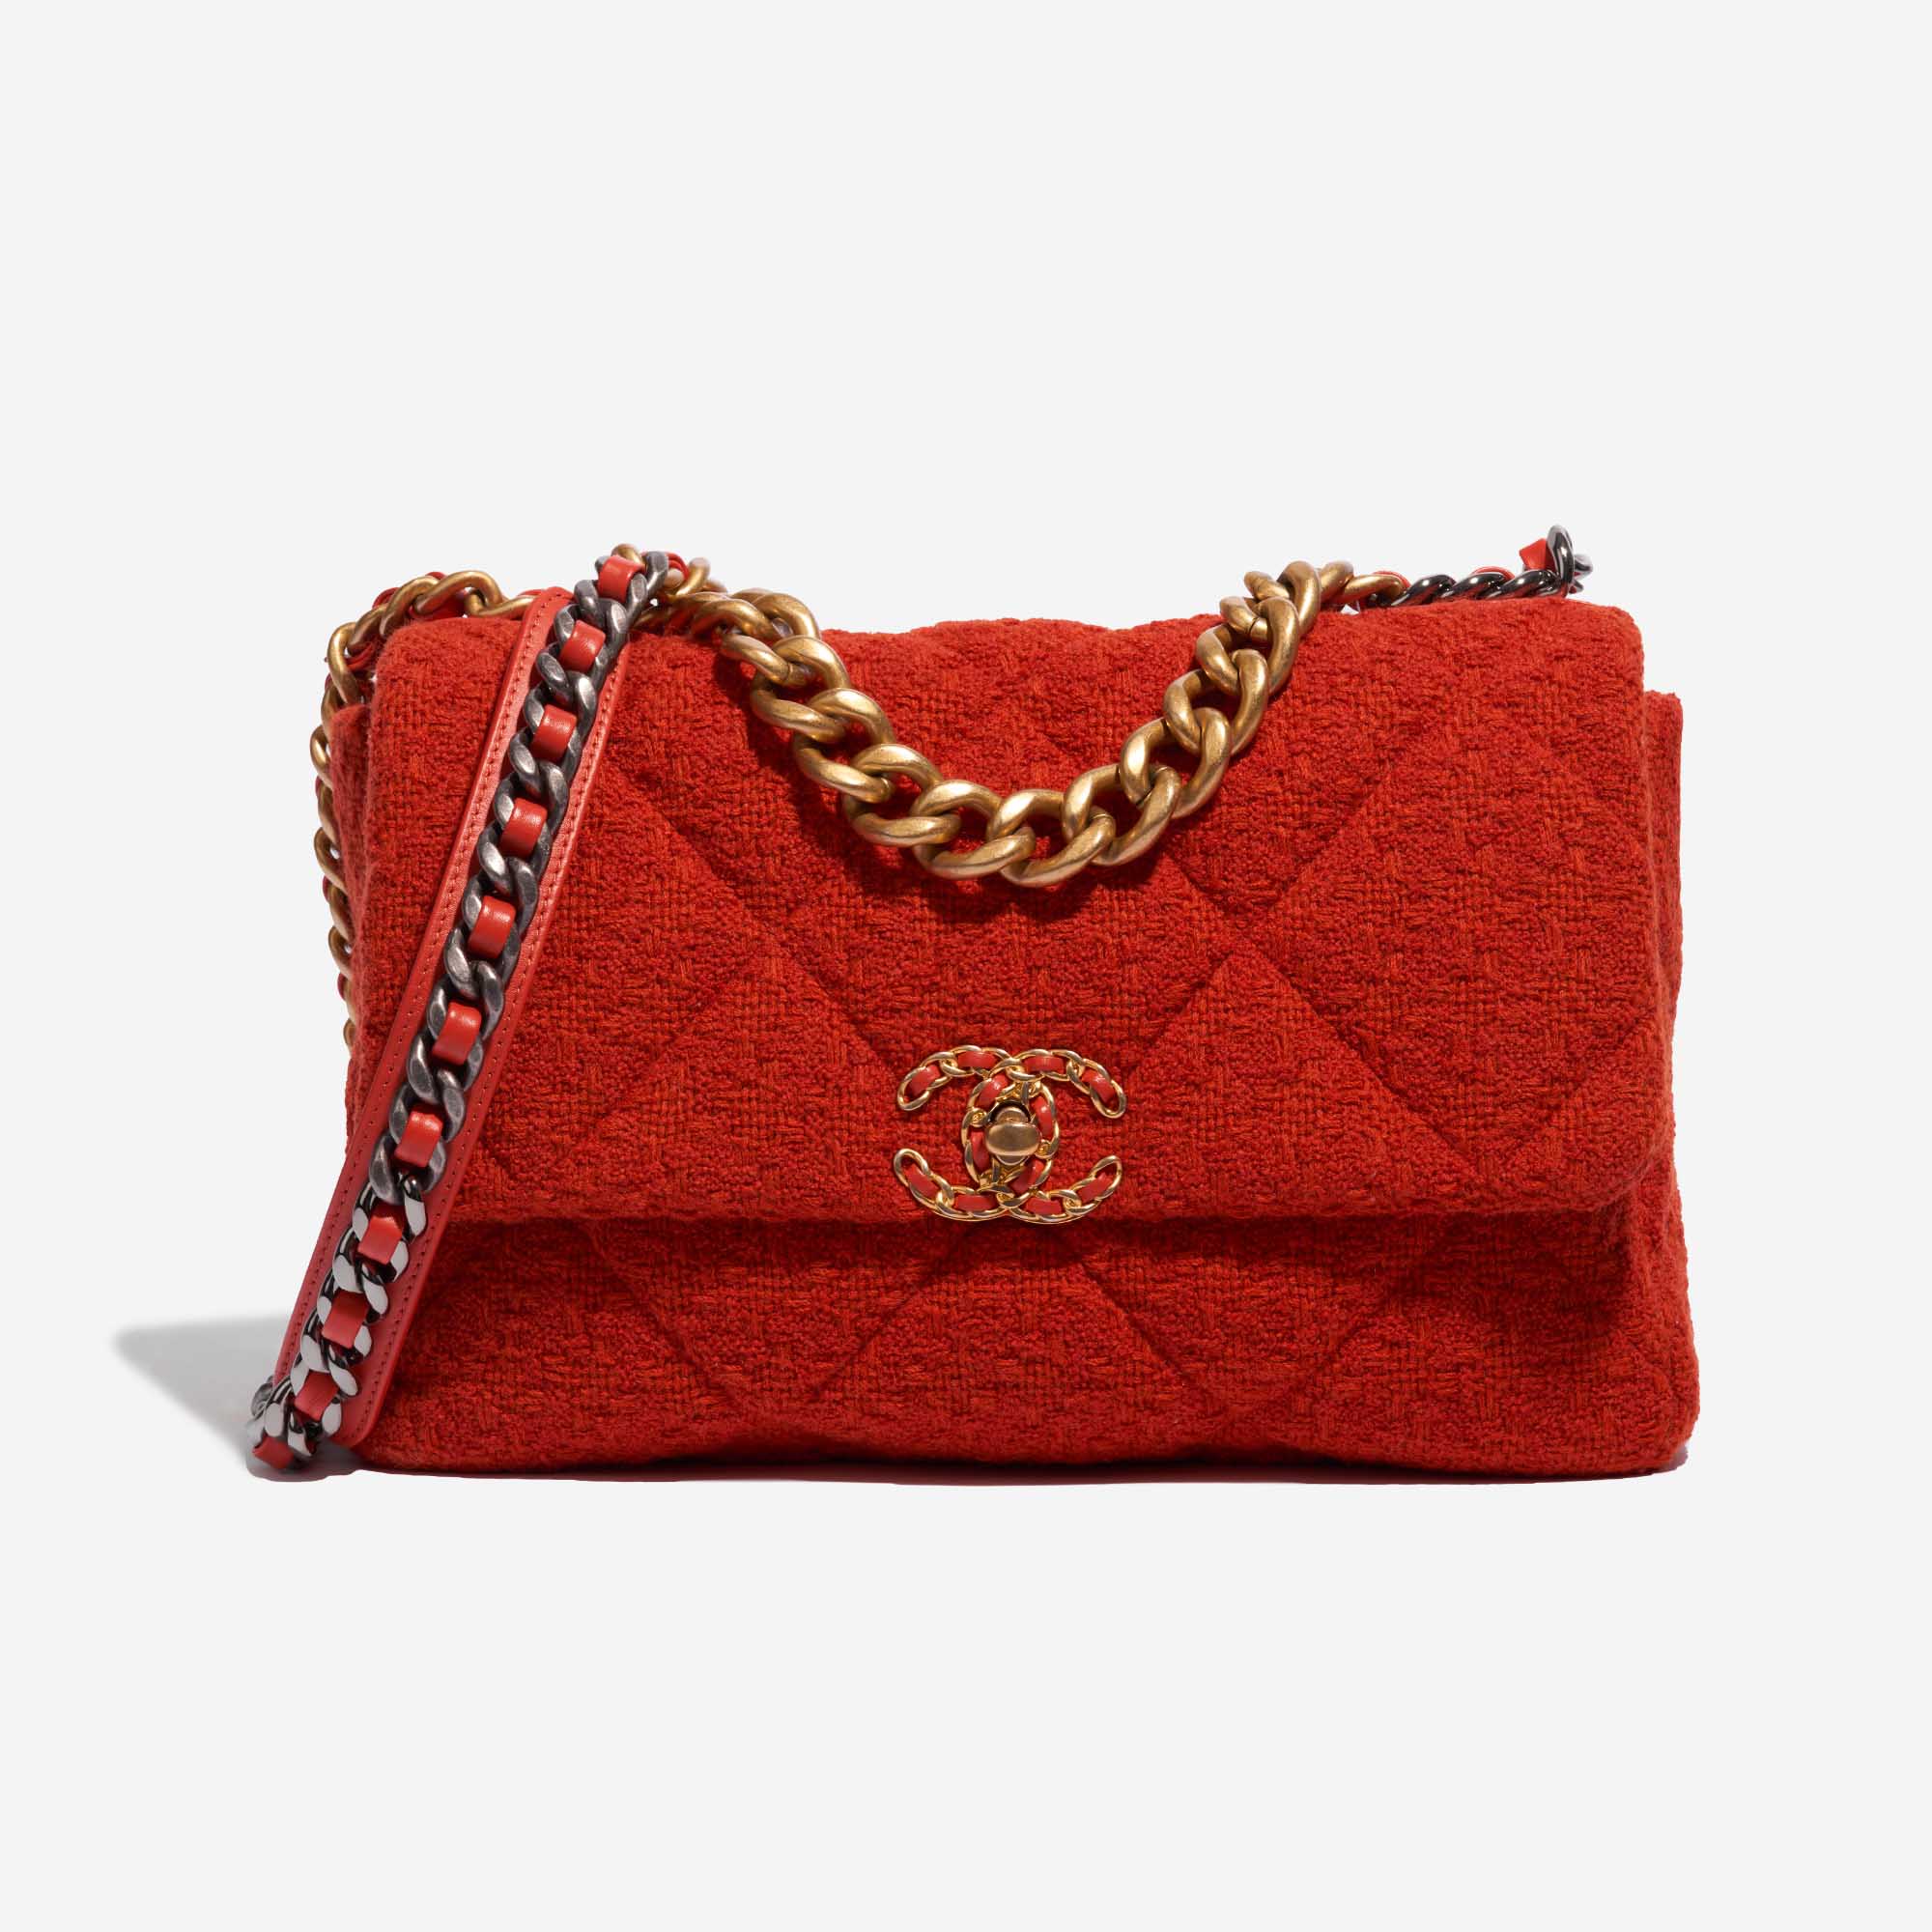 Pre-owned Chanel bag 19 Flap Bag Large Wool Red Red Front | Sell your designer bag on Saclab.com